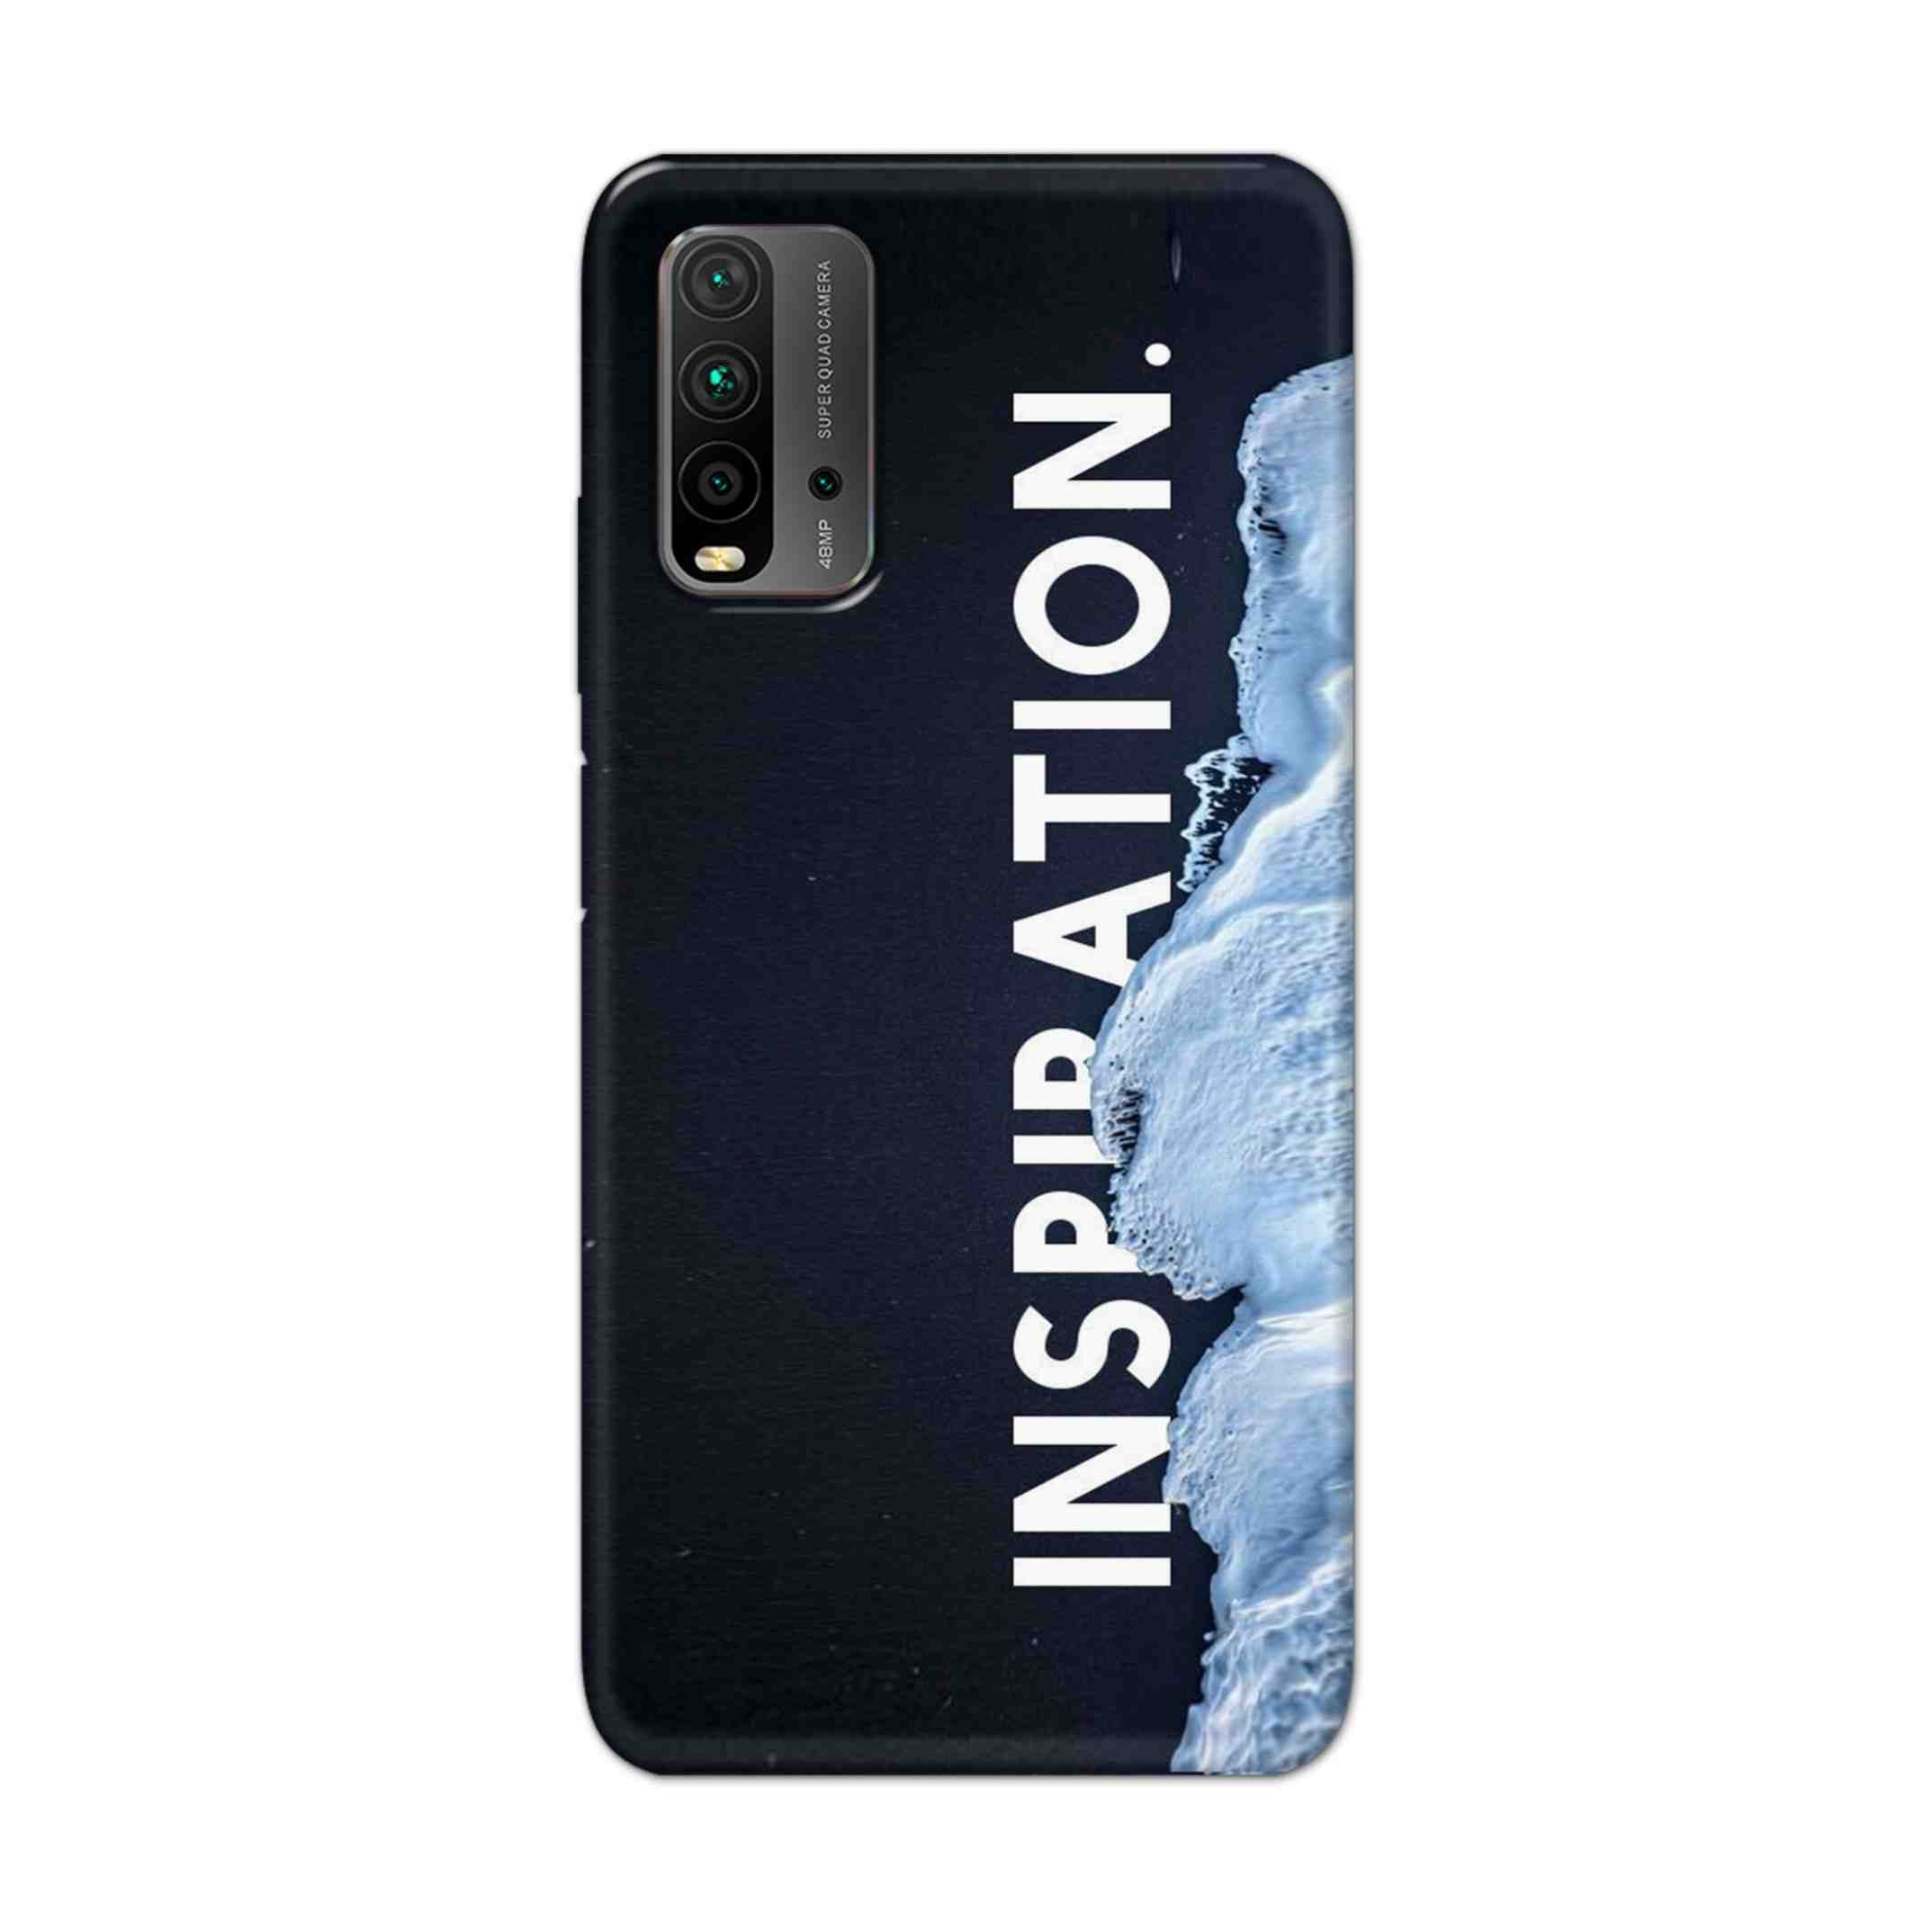 Buy Inspiration Hard Back Mobile Phone Case Cover For Redmi 9 Power Online